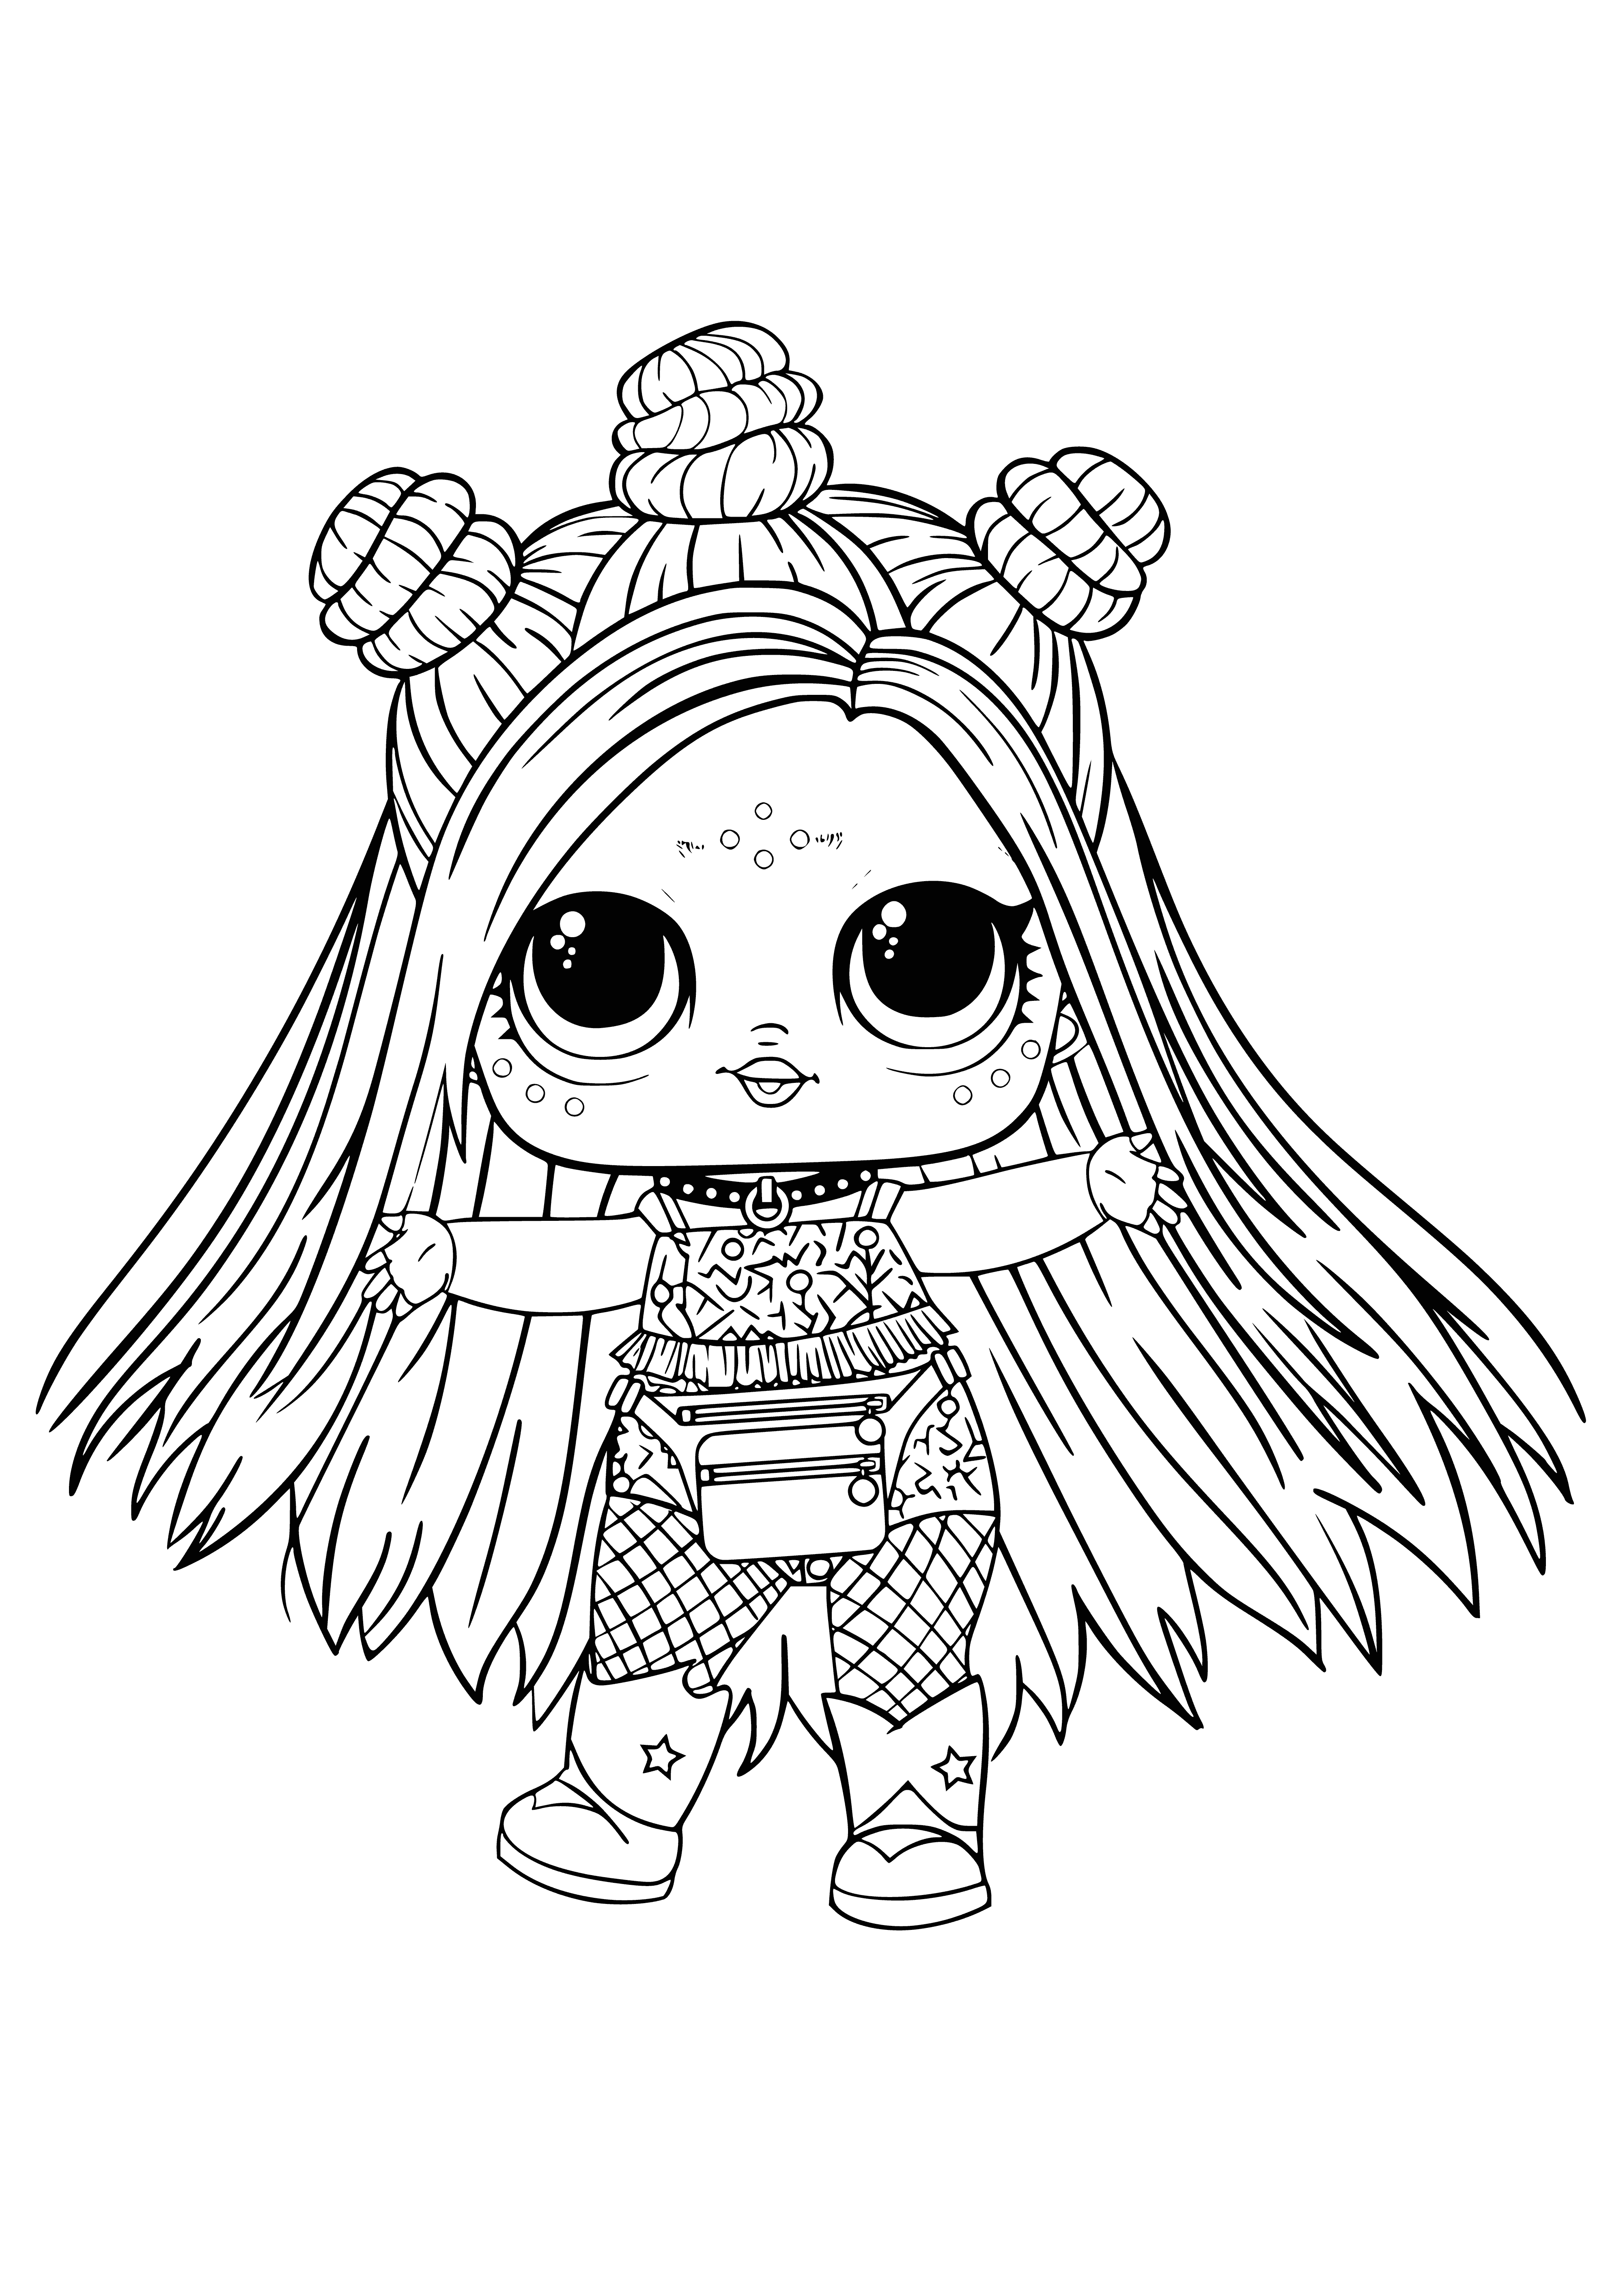 coloring page: LOL doll sits among kandi necklaces, pacifiers and EDM festival gear, hands in air eyes closed.